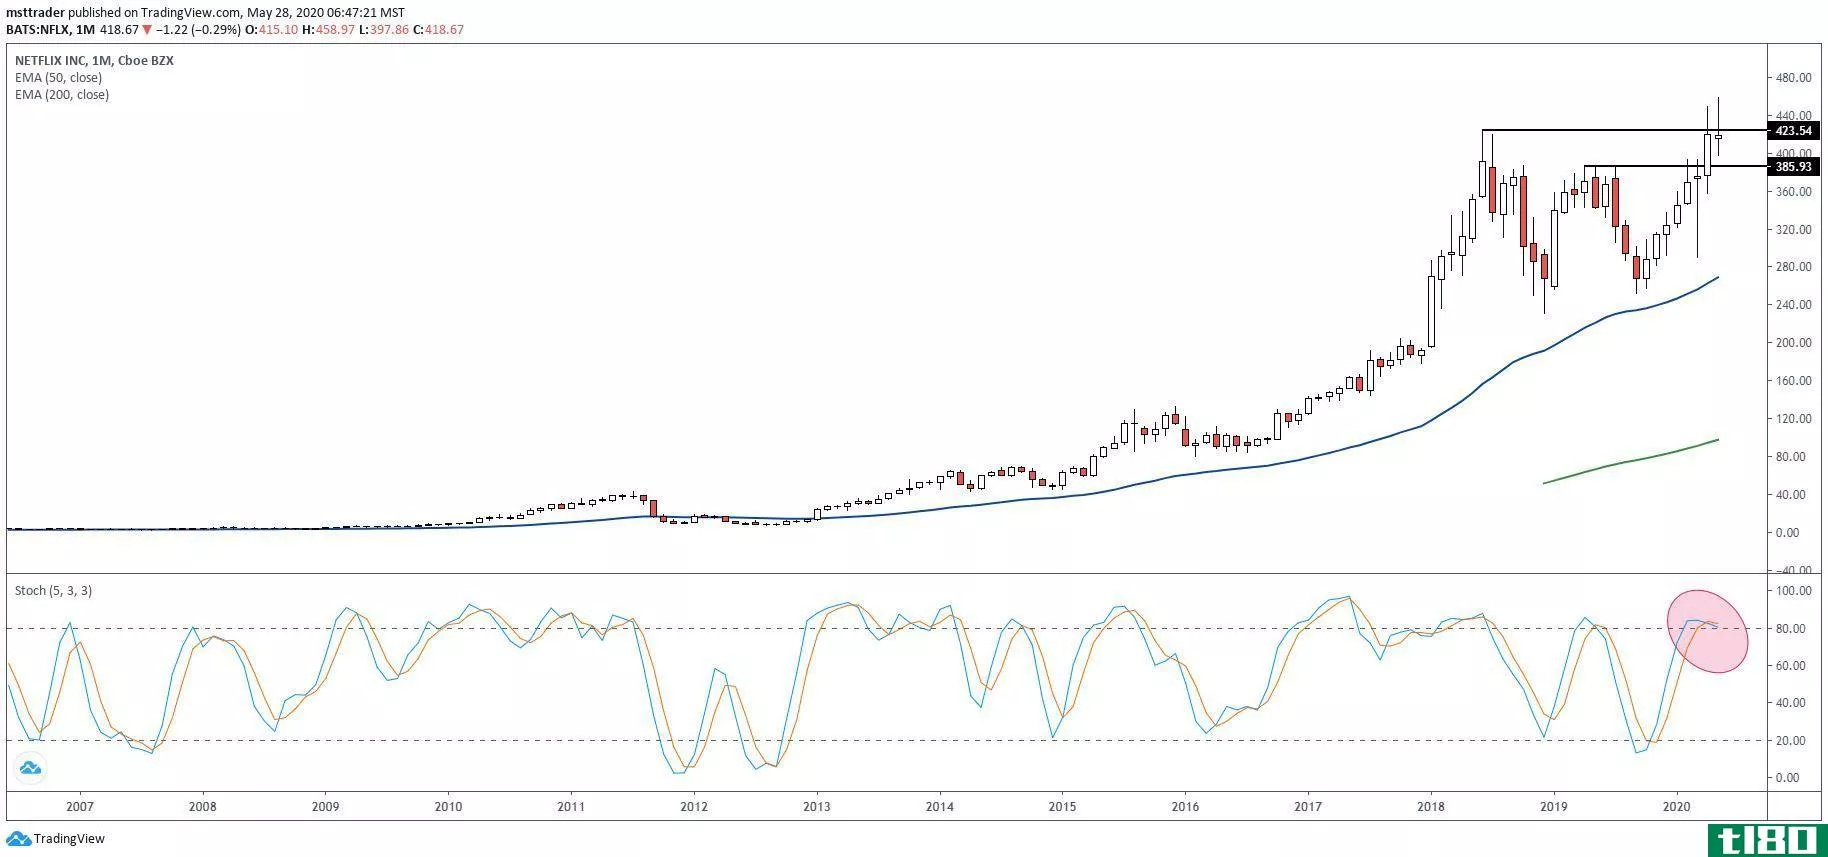 Long-term chart showing the share price performance of Netflix, Inc. (NFLX)